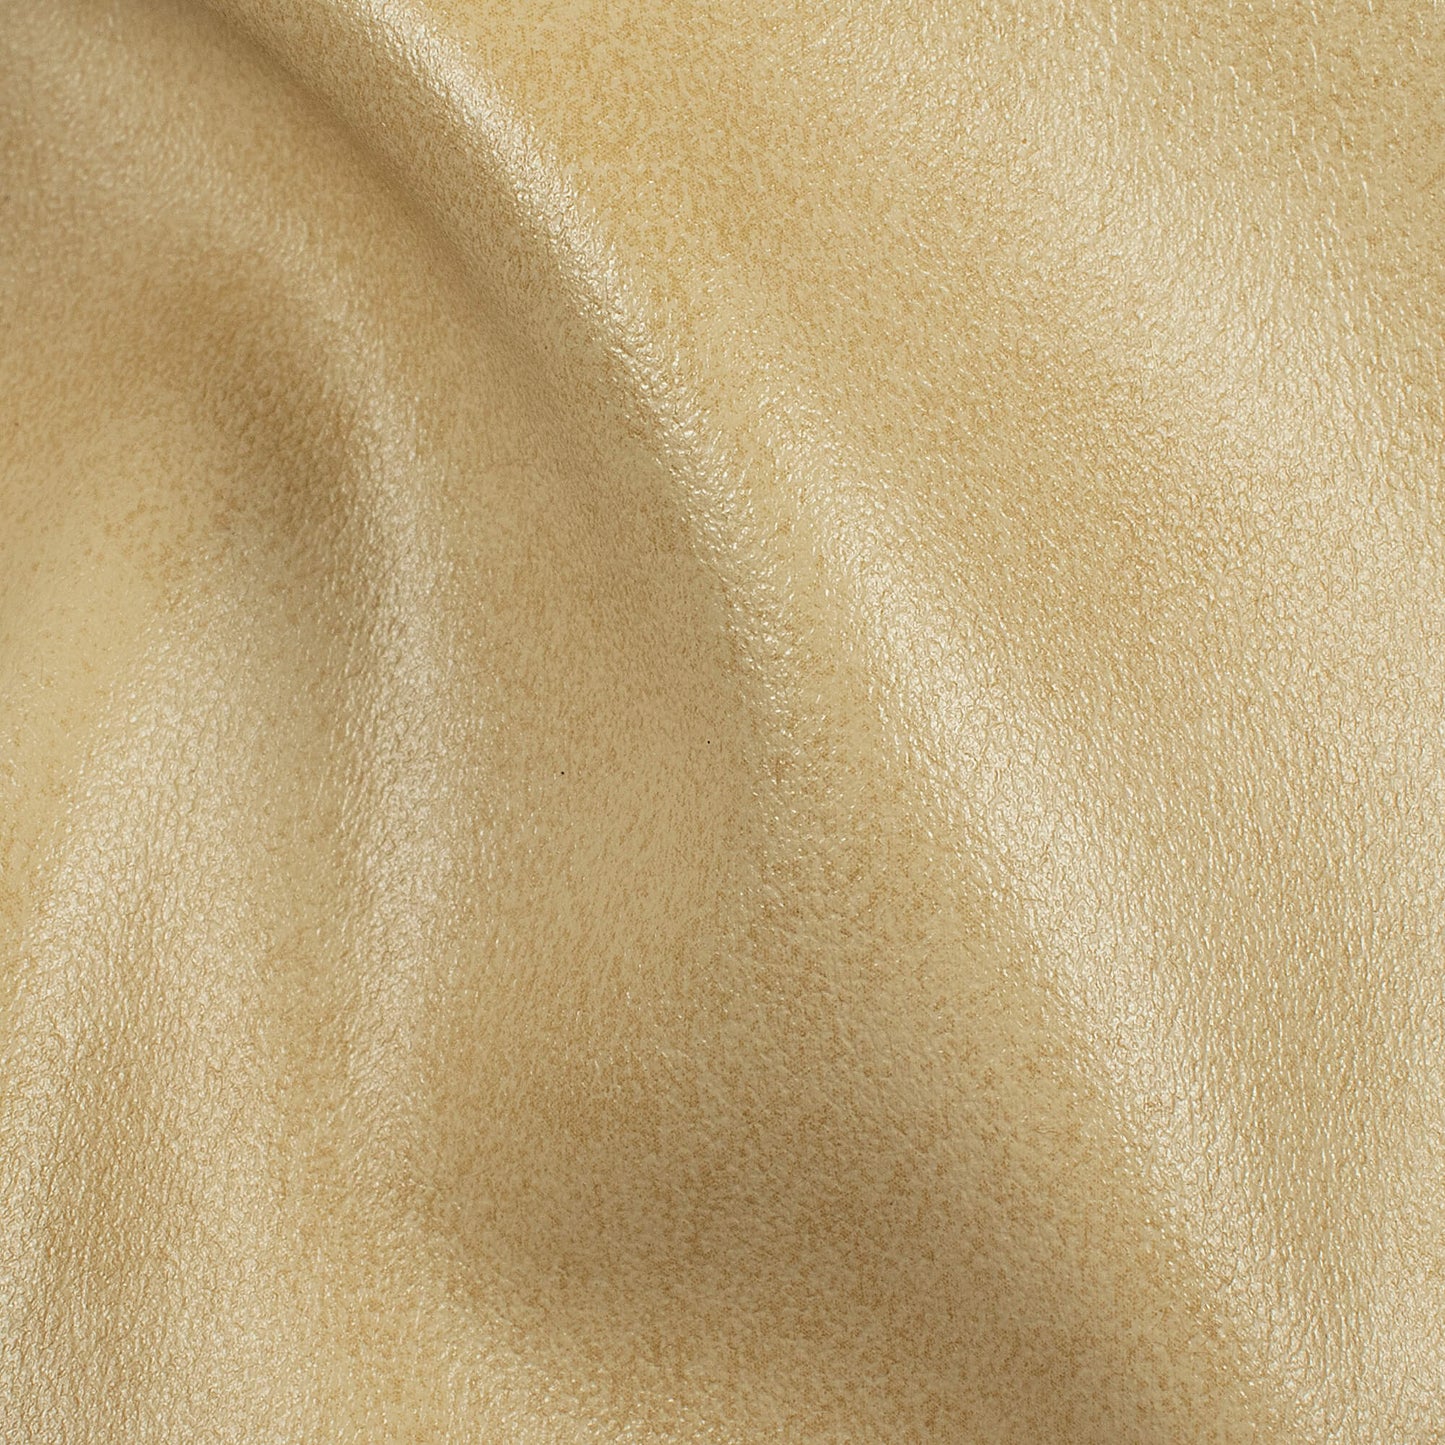 Latte Beige Self Textured Exclusive Sofa Fabric (Width 54 Inches)